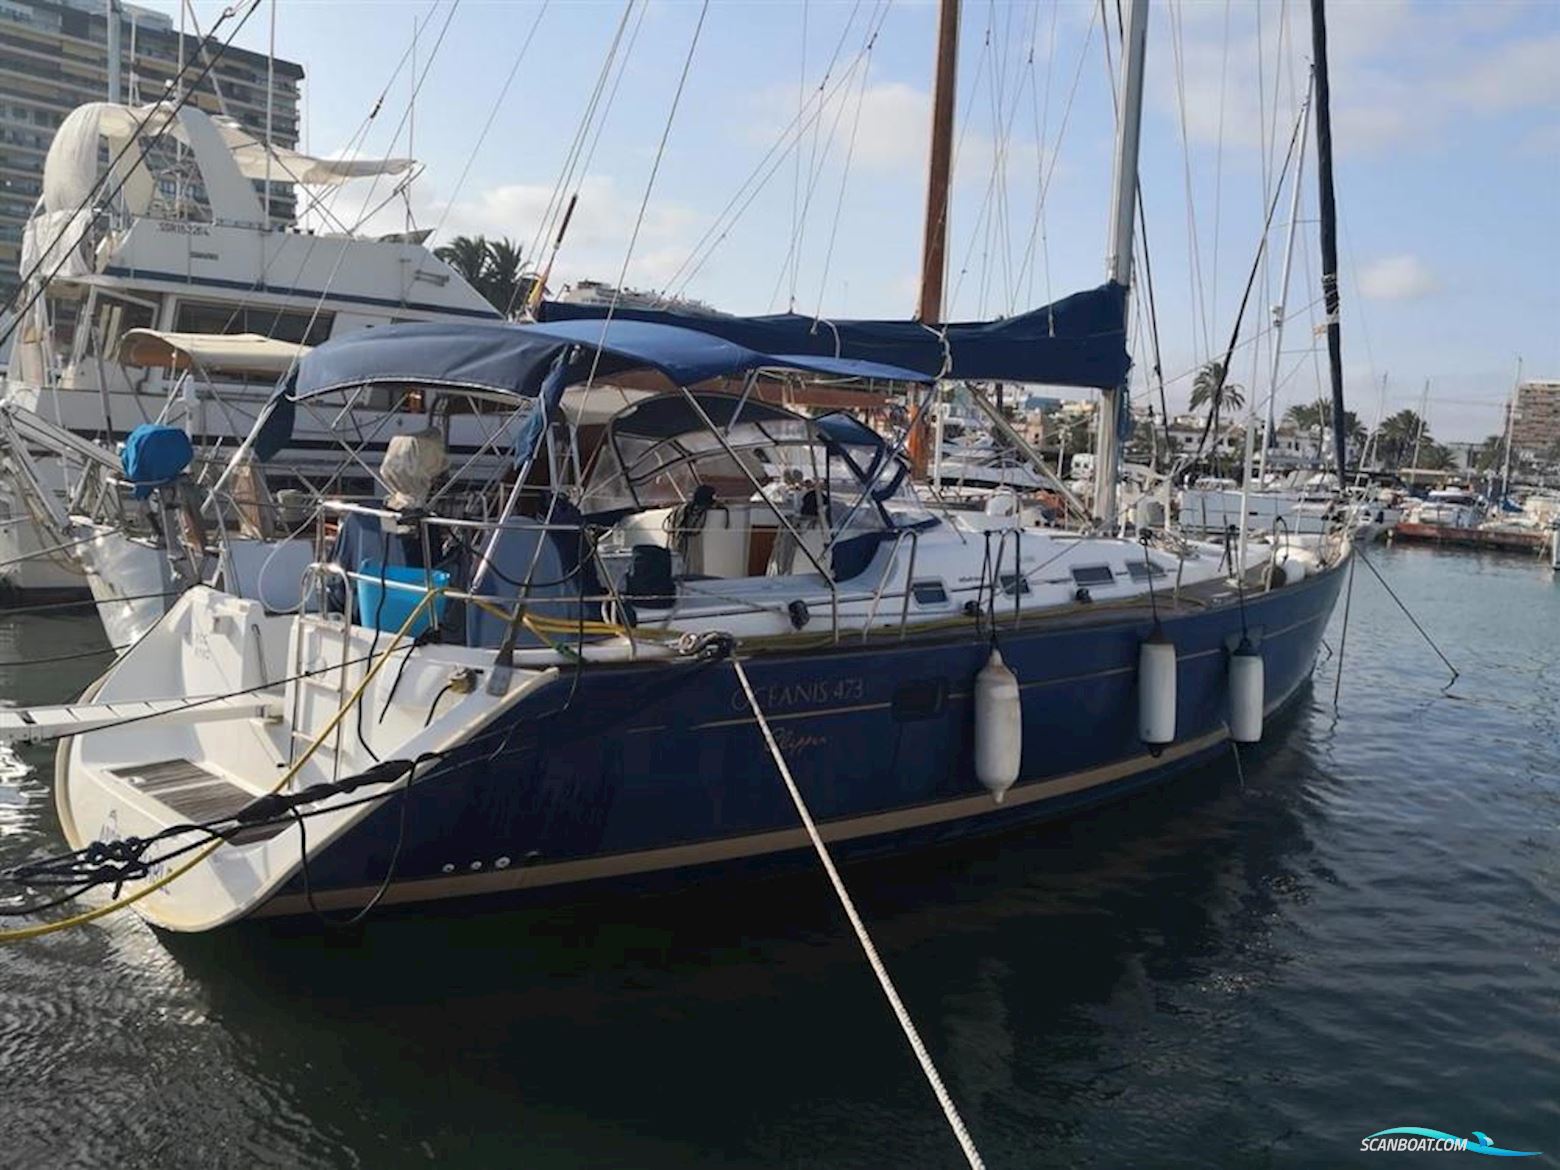 Beneteau Oceanis 473 Clipper Sailing boat 2004, with 1 x Yanmar 4JH-The engine, Spain